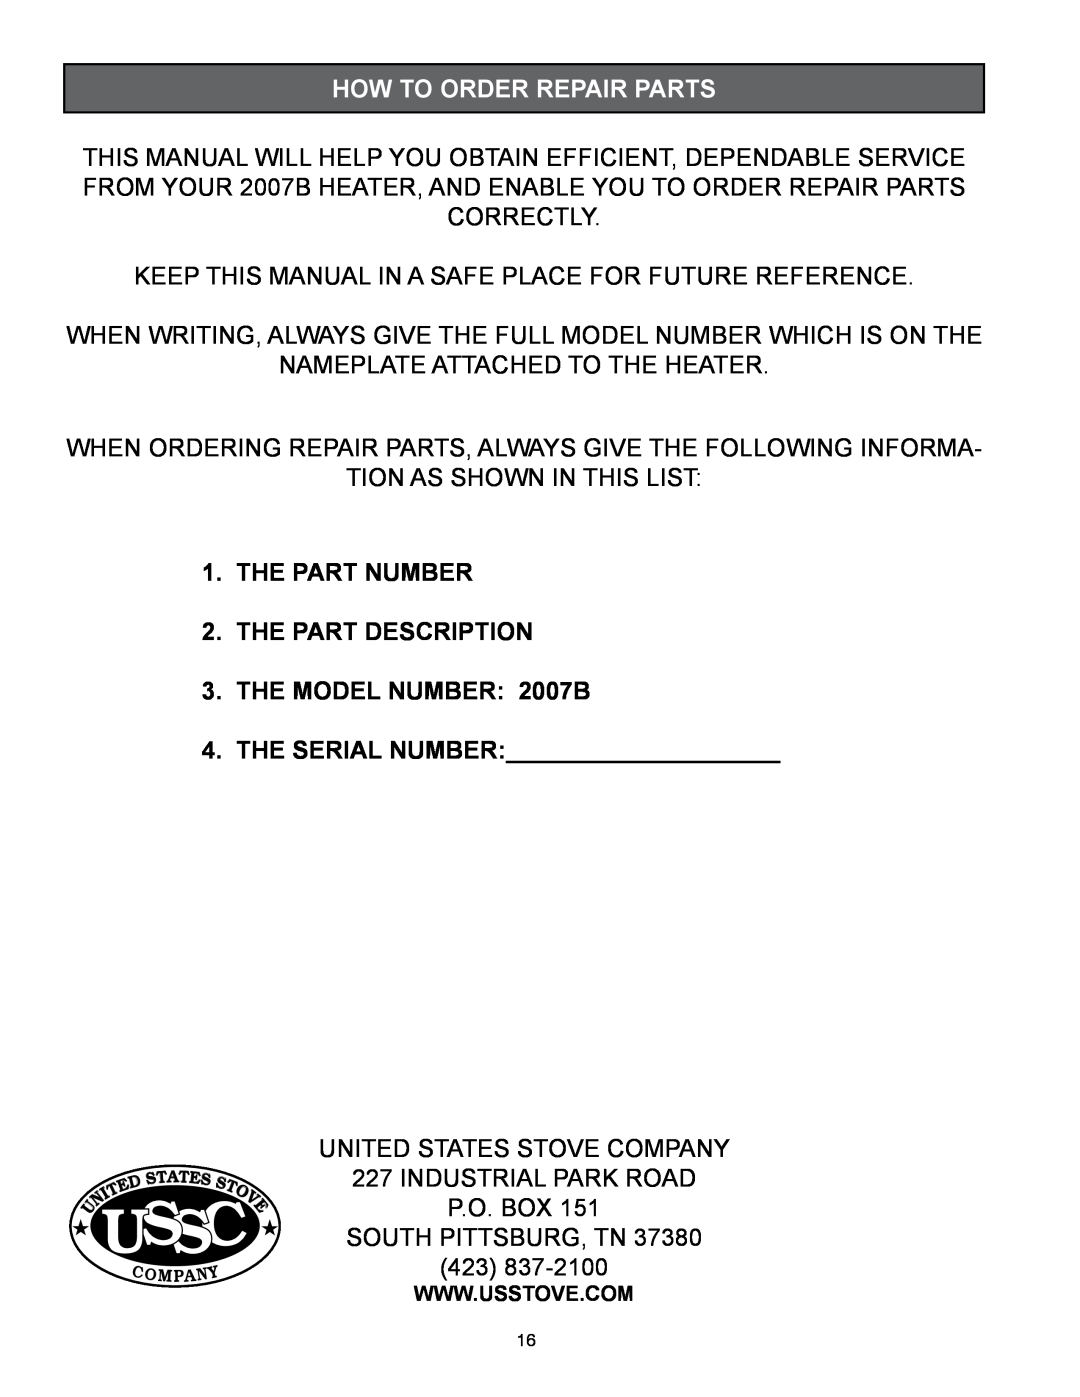 United States Stove Ussc, how to order repair parts, The part number 2.the part description, the model number 2007B 